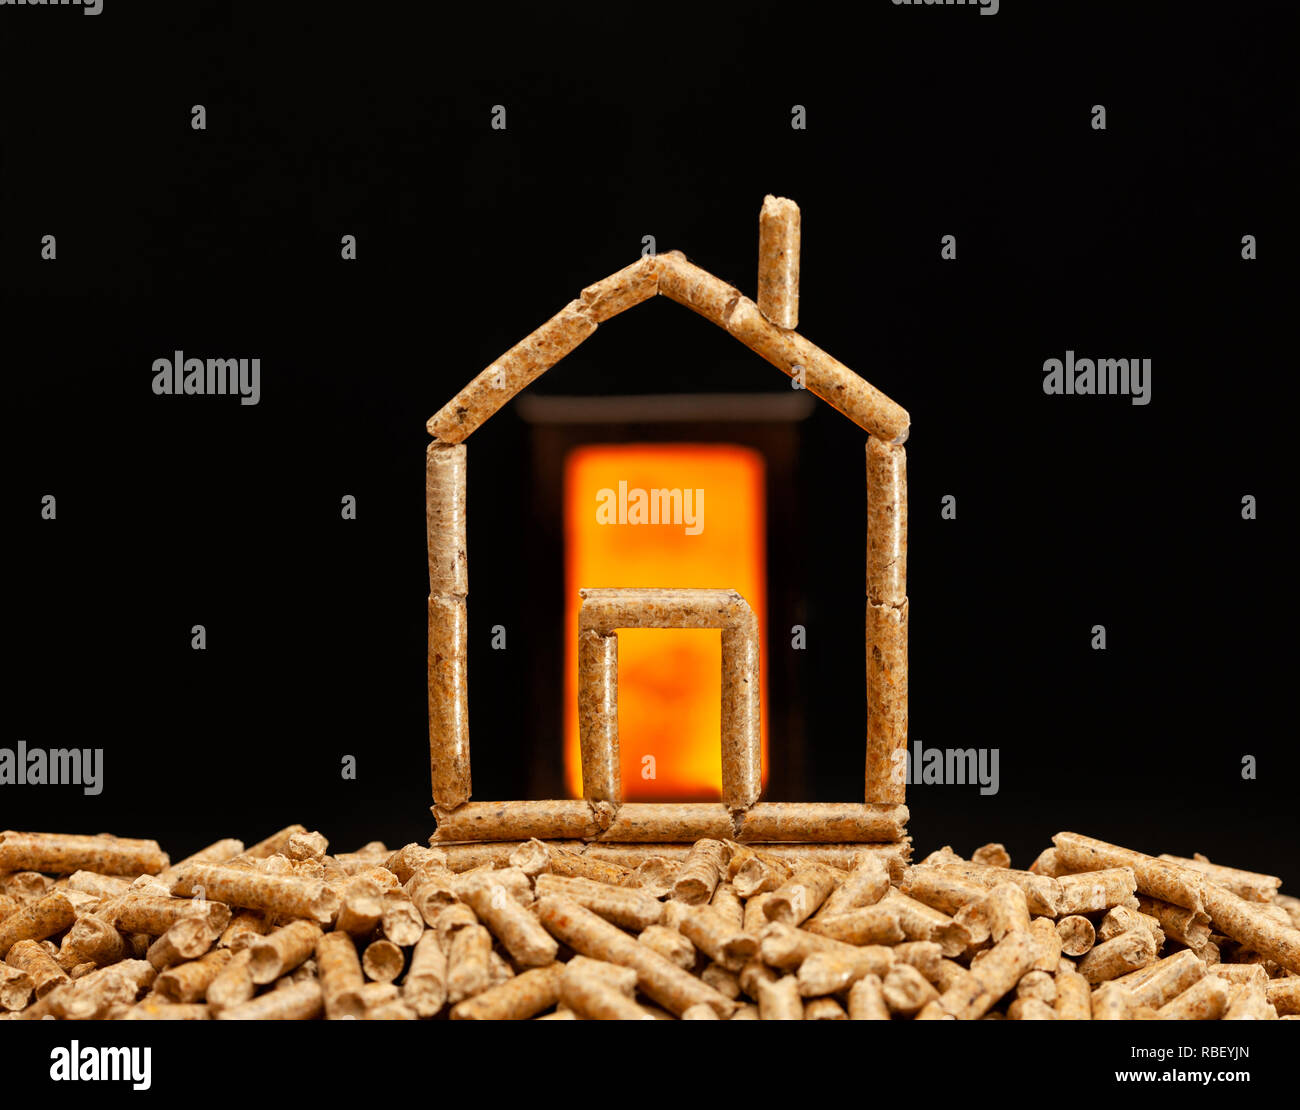 Miniature house made with wood pellets. Heating concept with combustion chamber in the background. Stock Photo